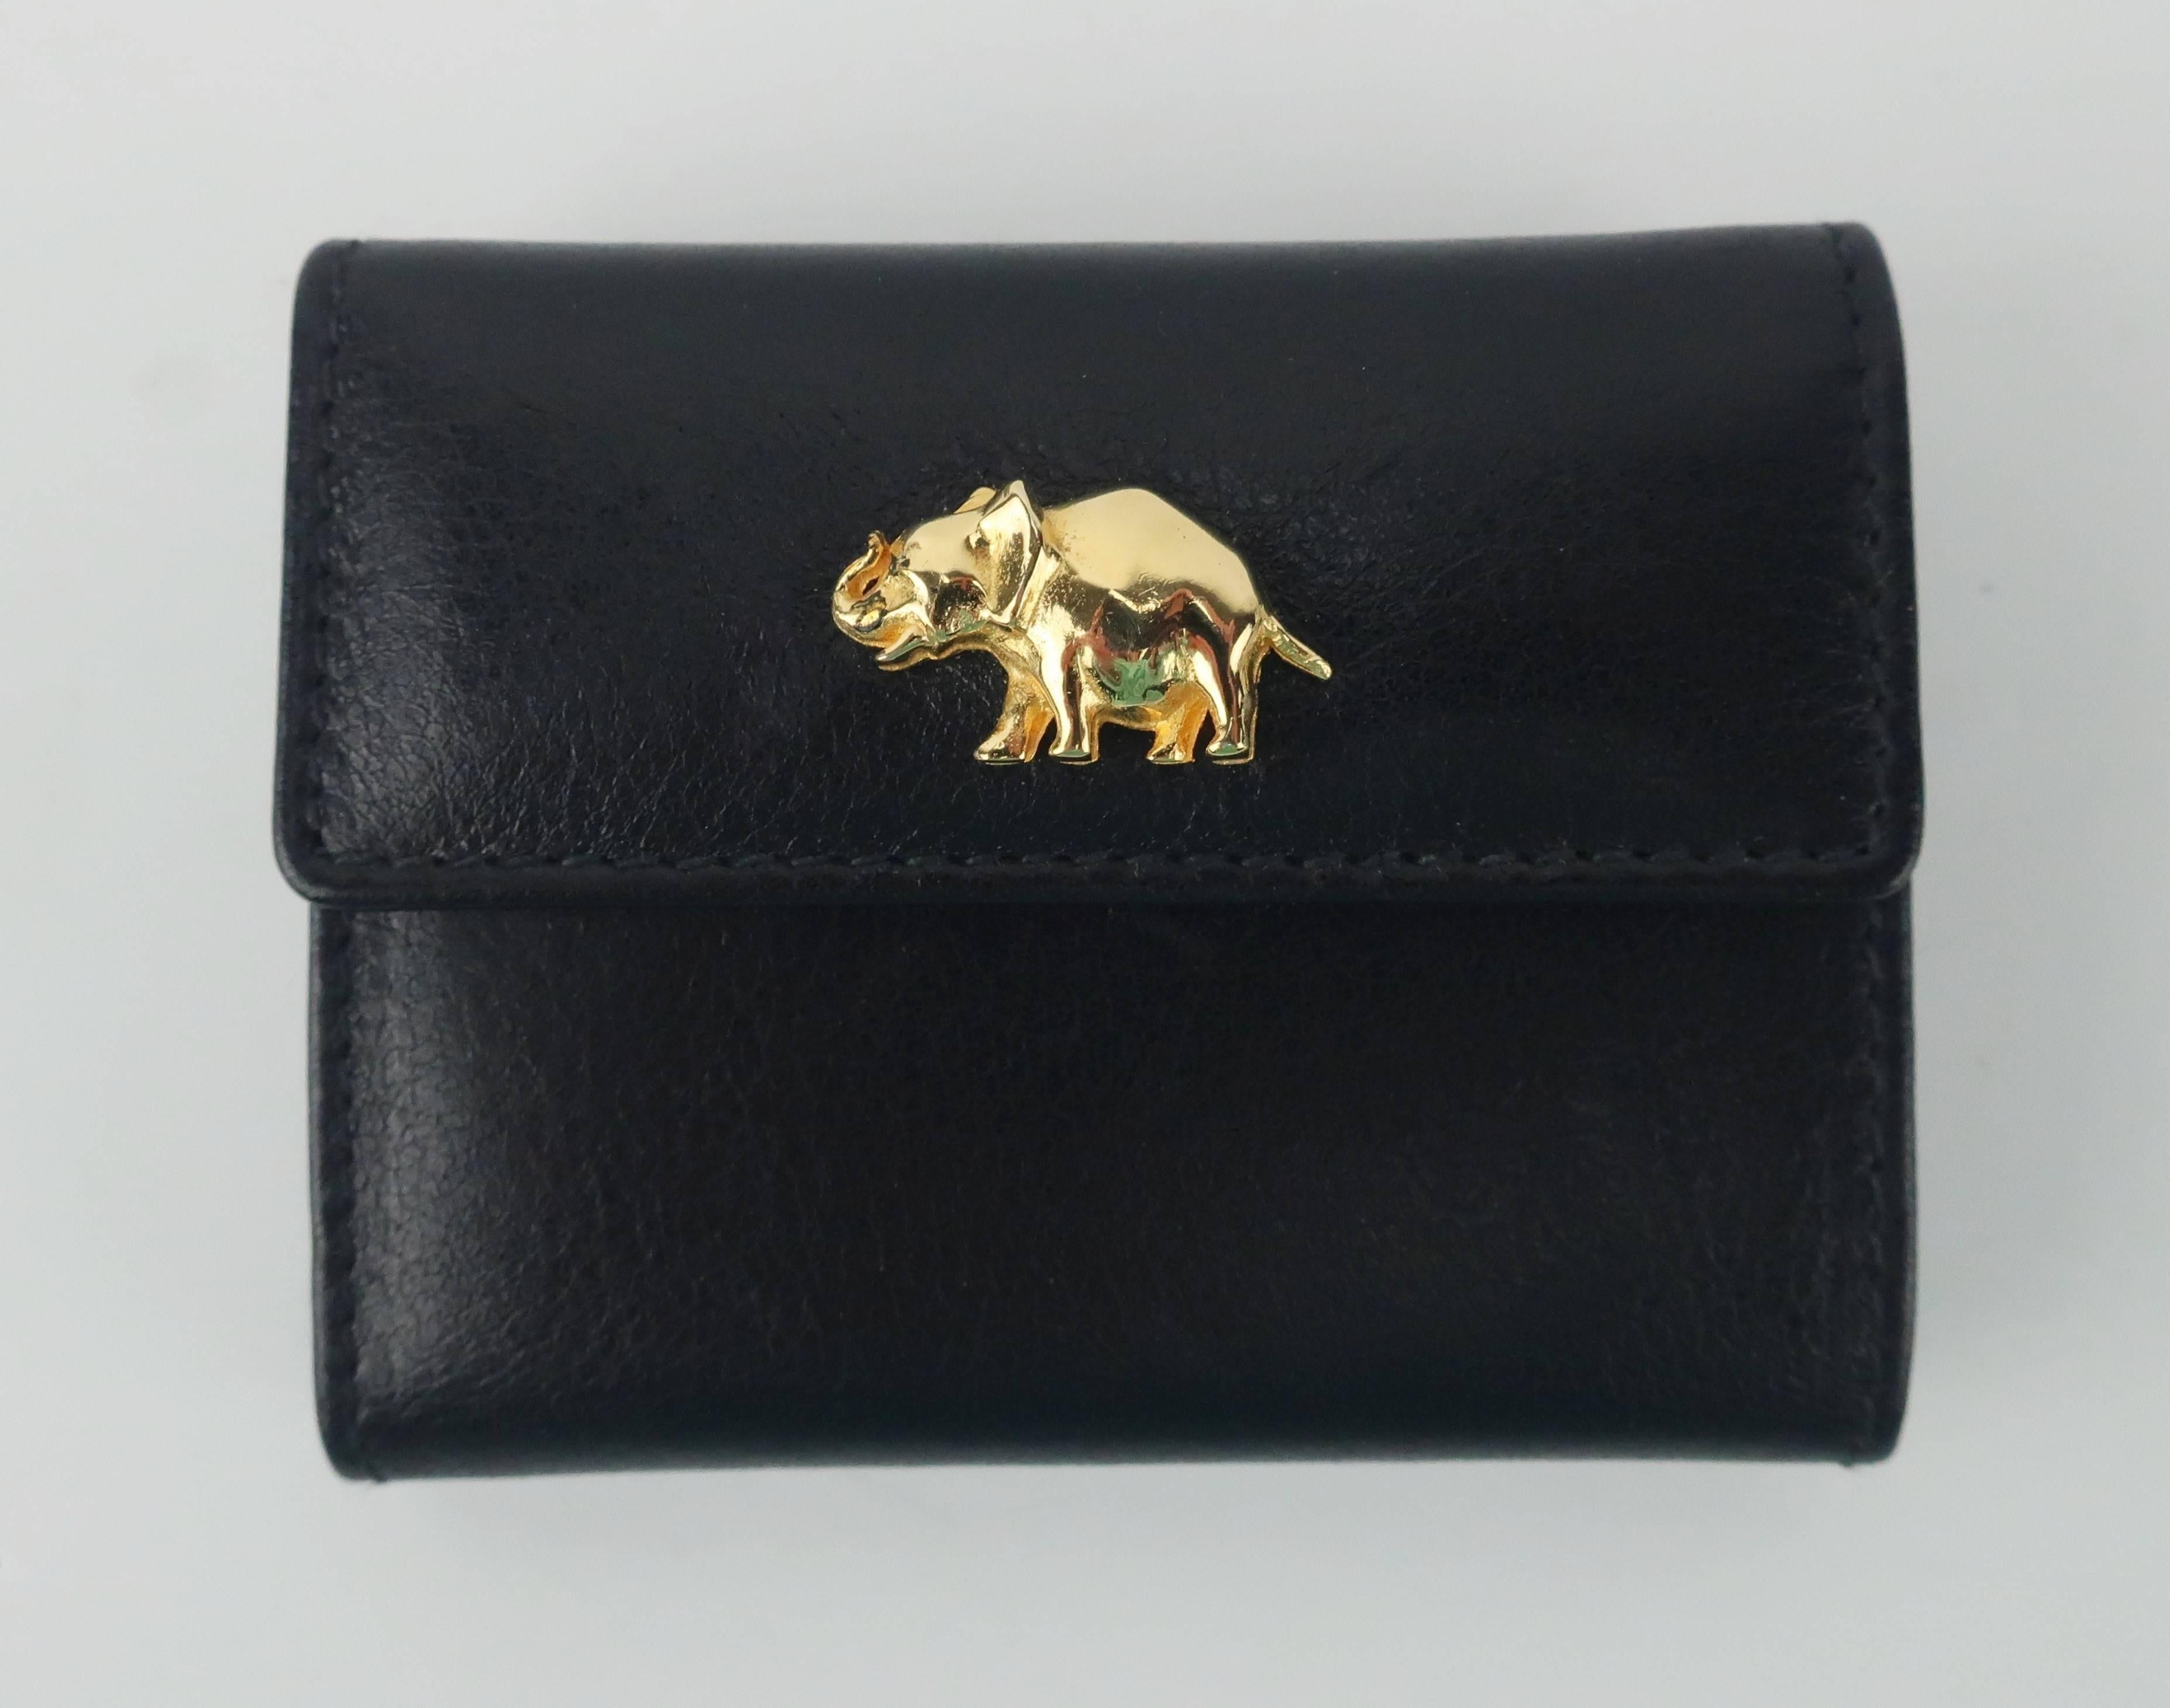 Elegant elephant!  This small scale Judith Leiber black leather wallet is a tri-fold design just big enough for a couple of bills with a fold open coin purse attached.  The wallet snaps in front and back for each compartment and there is an interior